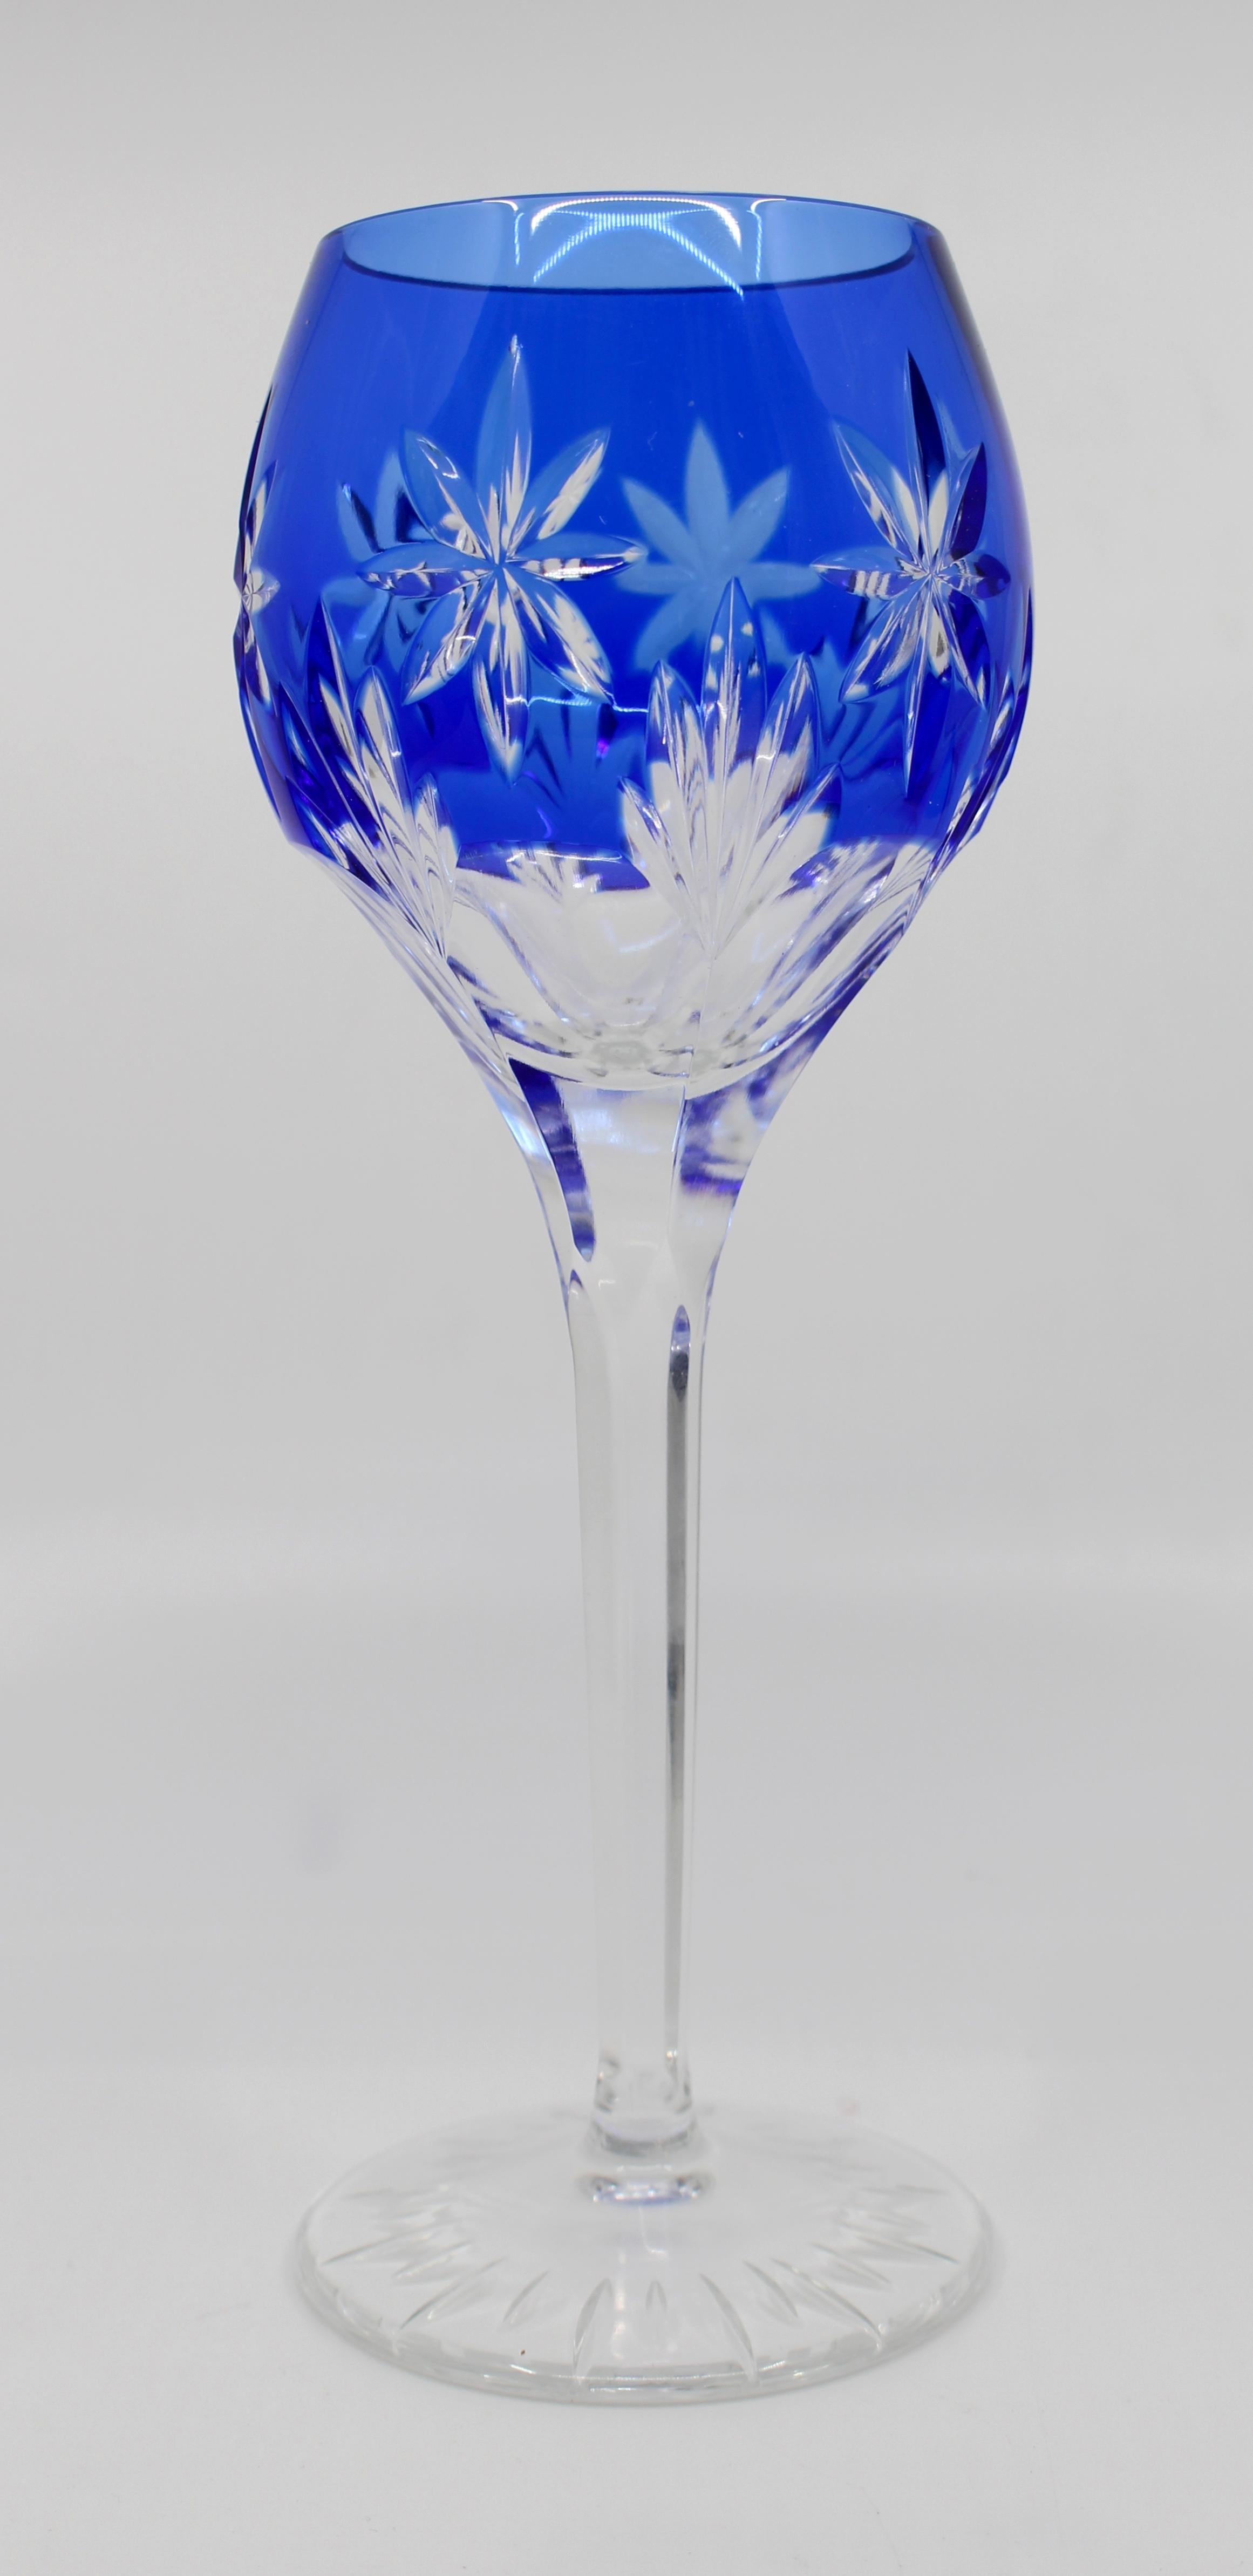 Period English, circa 1950.
Origin Stourbridge
Type Hock glasses
Set 12
Measures: Width 8.5 cm / 3 1/4 in
Height 21.5 cm / 8 1/2 in
 

 

Lovely quality set of fine handmade hock glasses

Blue overlay crystal to the bowl with a star